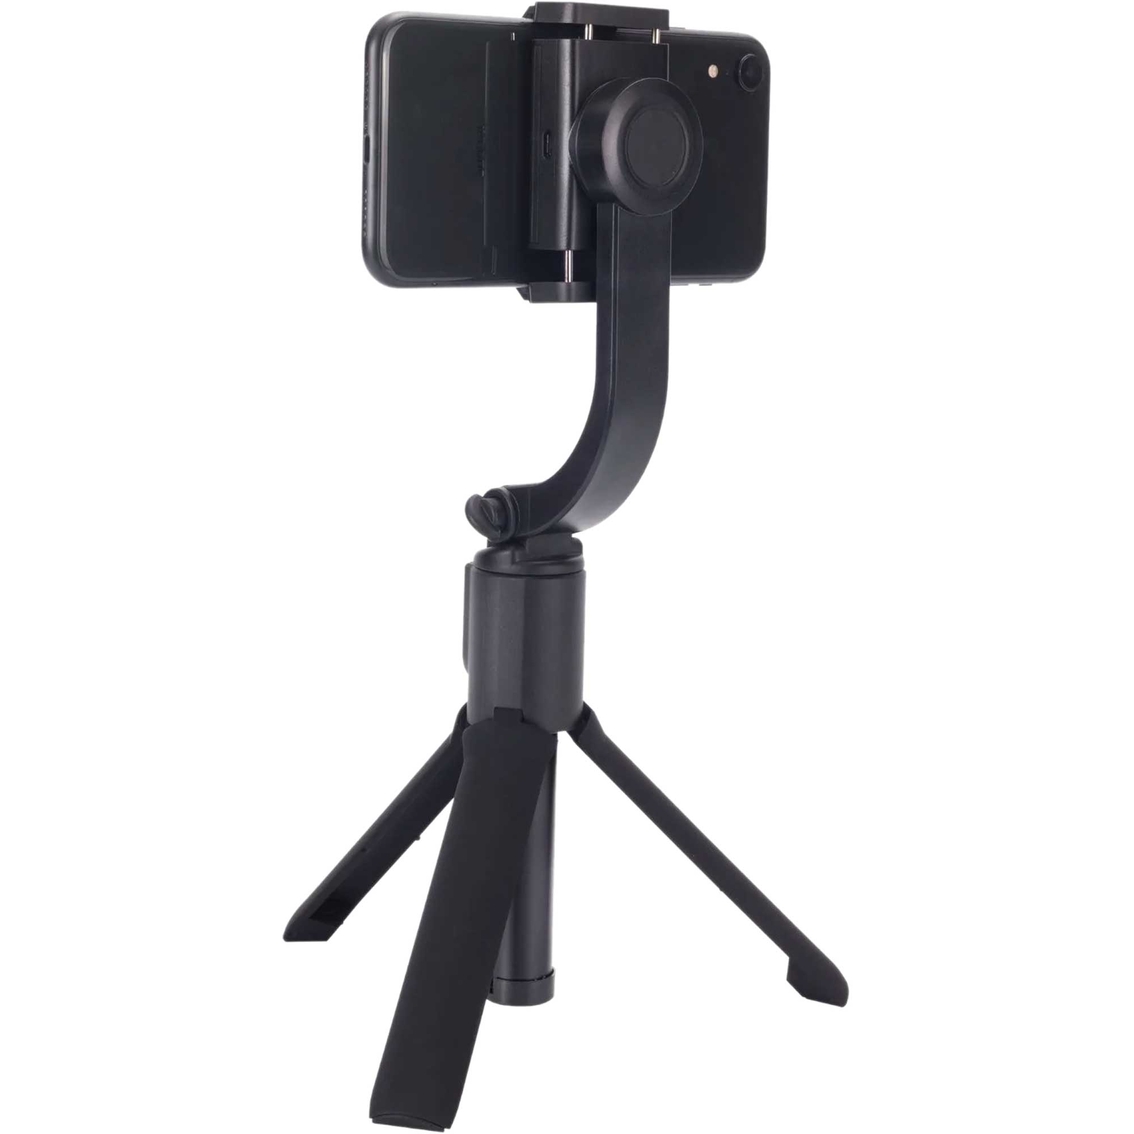 Kaiser Baas S1 Single Axis Stabilized Gimbal - Image 2 of 9